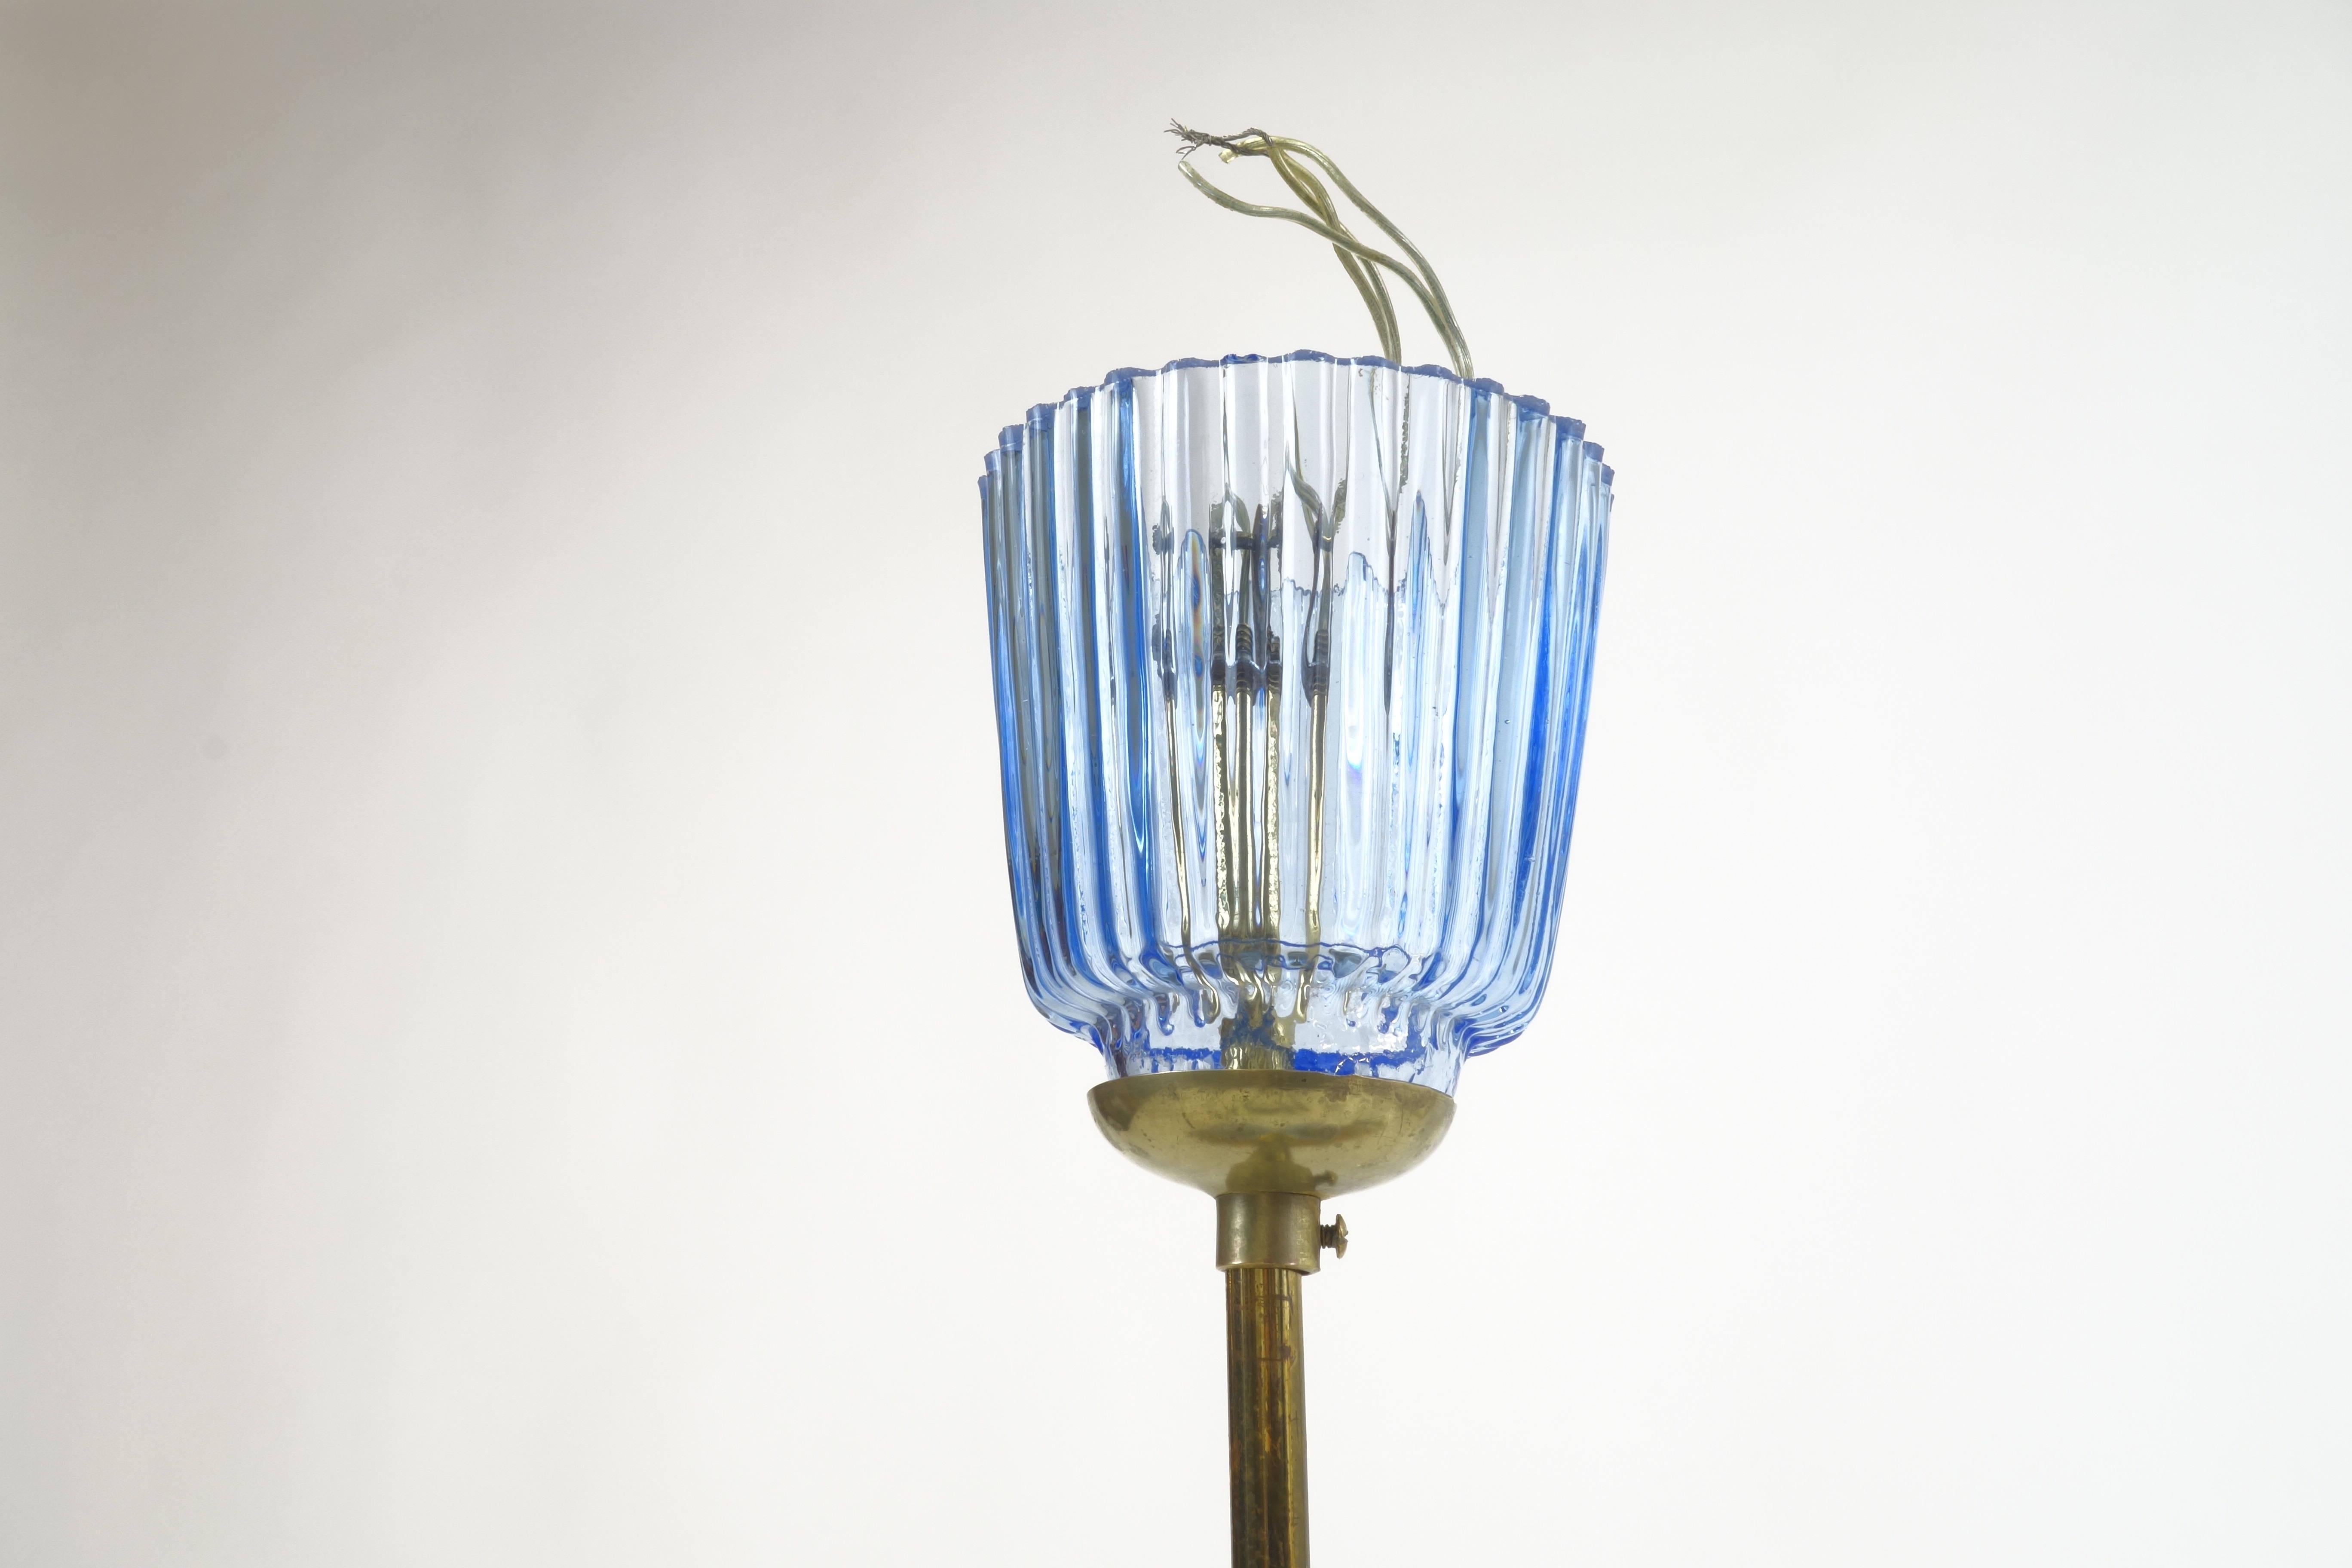 Chandelier by Barovier & Toso, Murano glass blue 1940s brass finishing For Sale 1